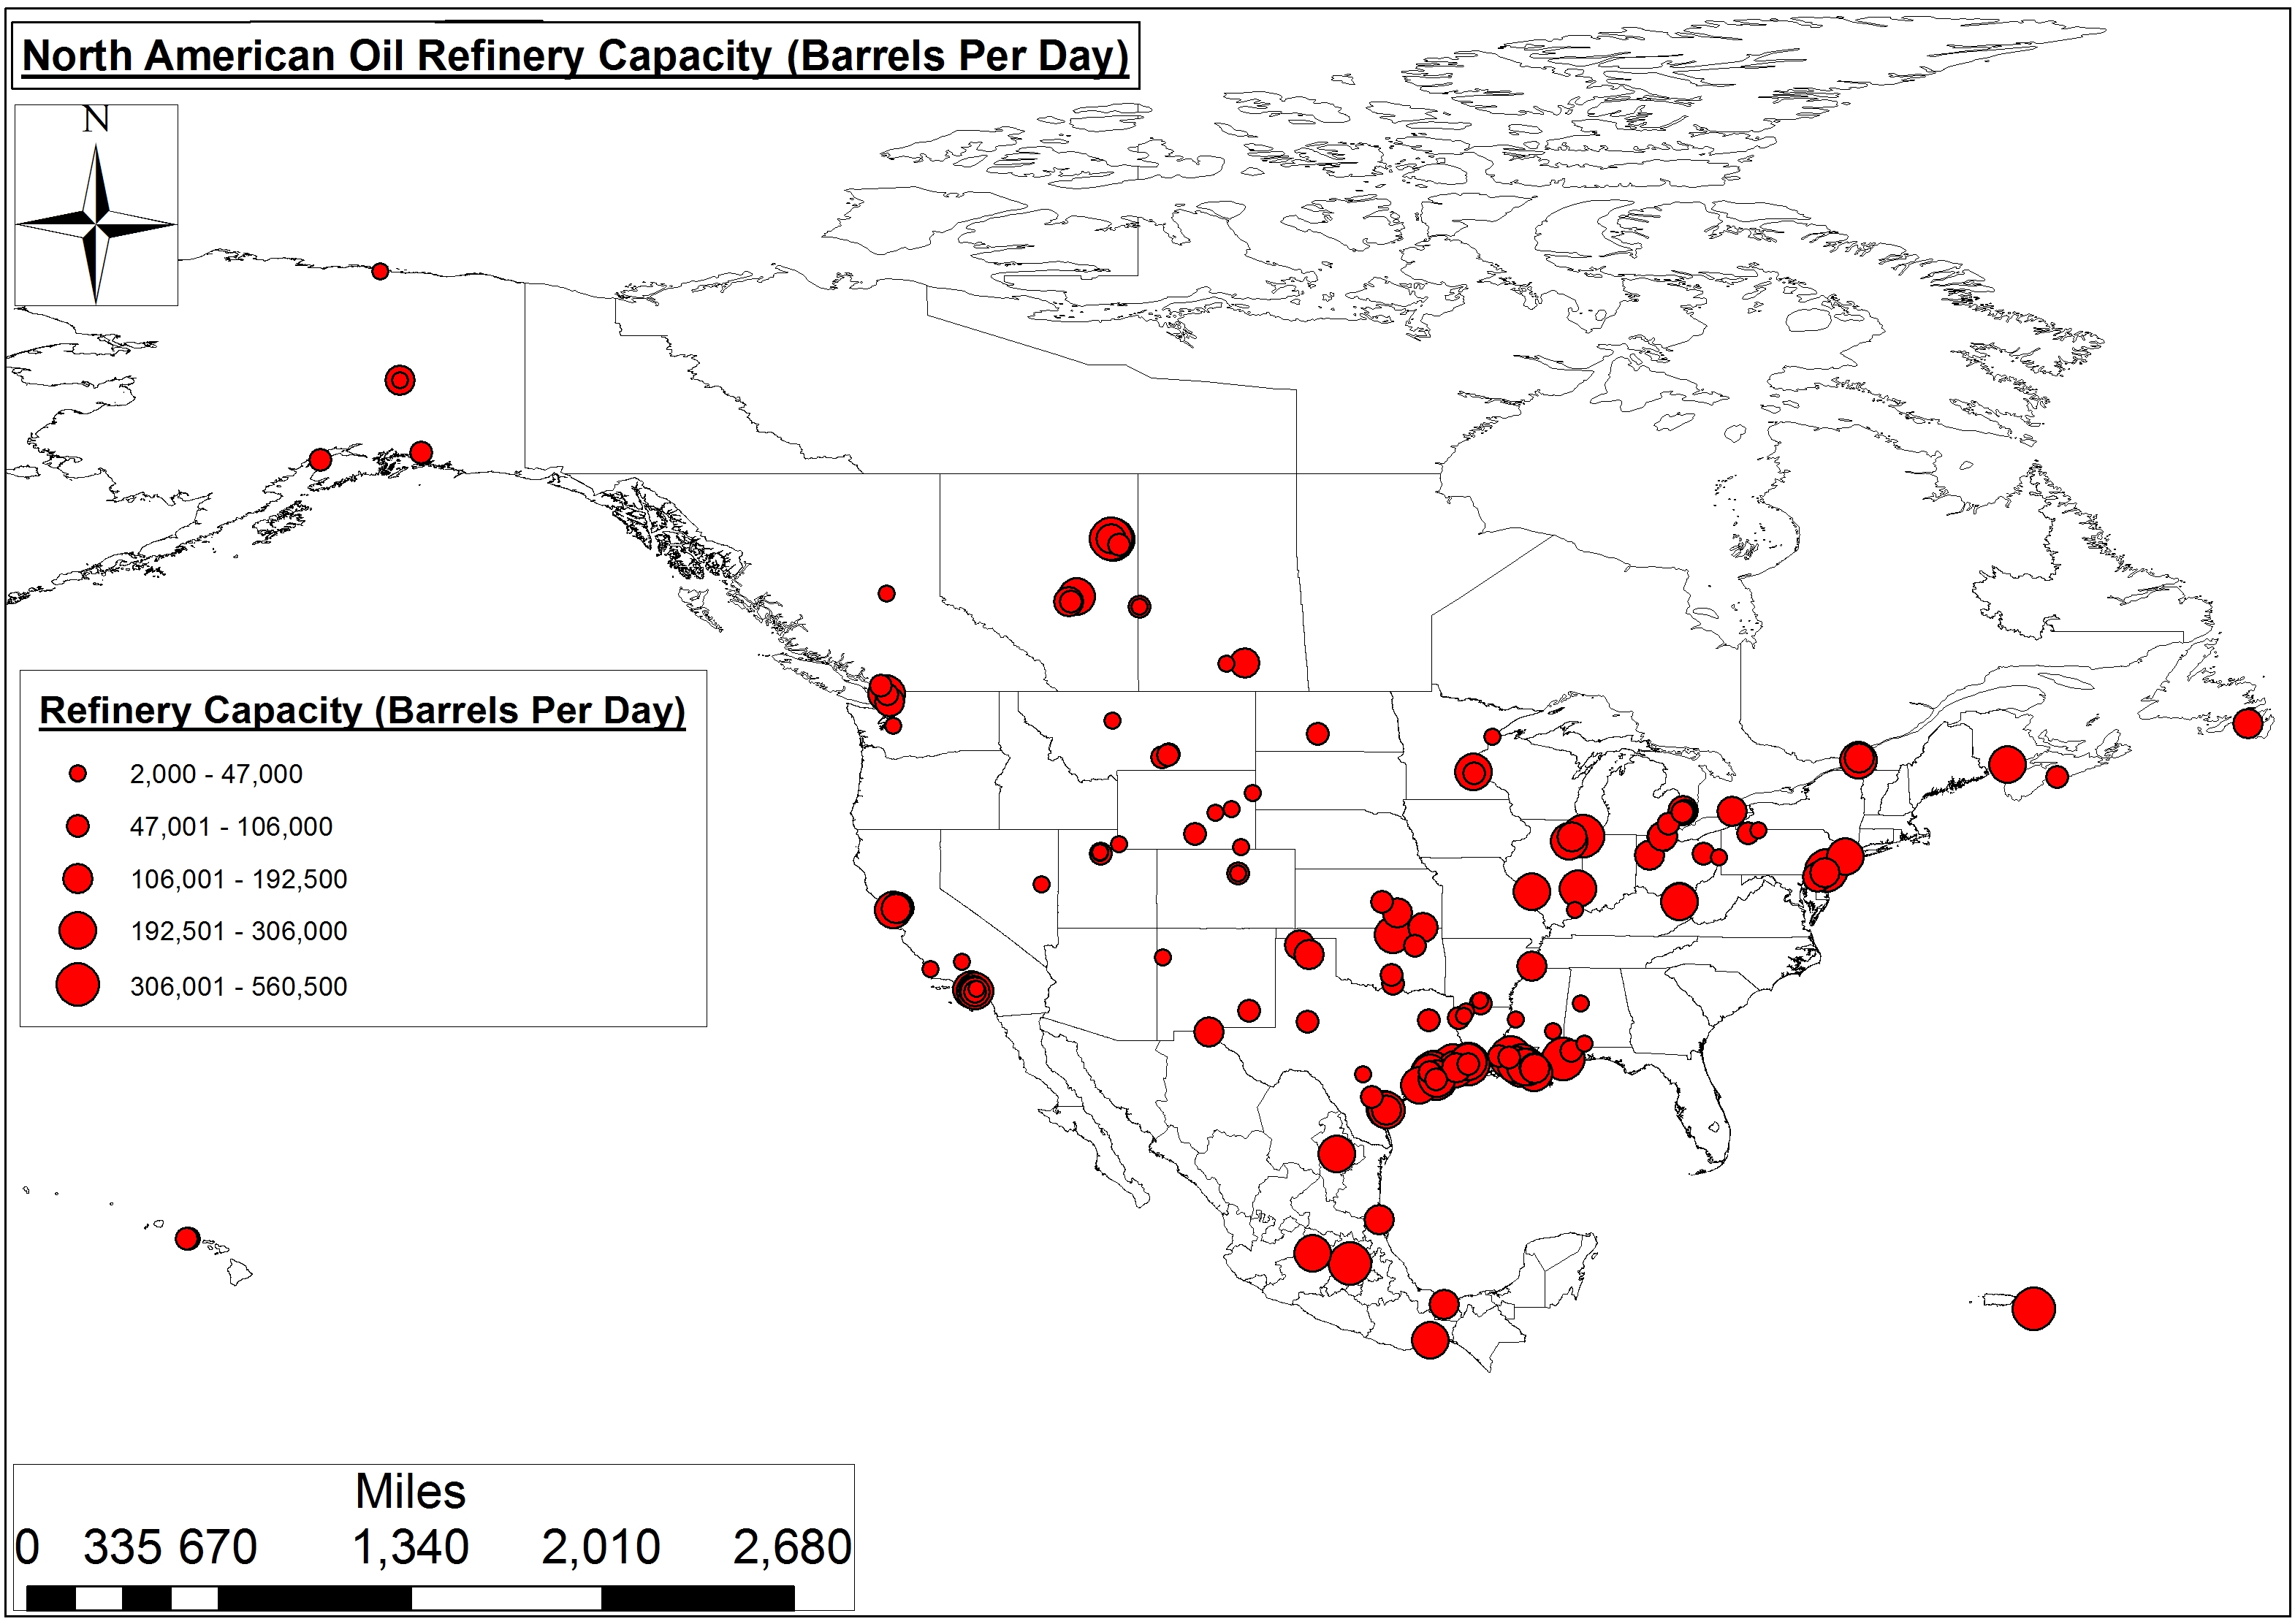 US Oil Refineries and Economic Justice - By FracTracker Alliance